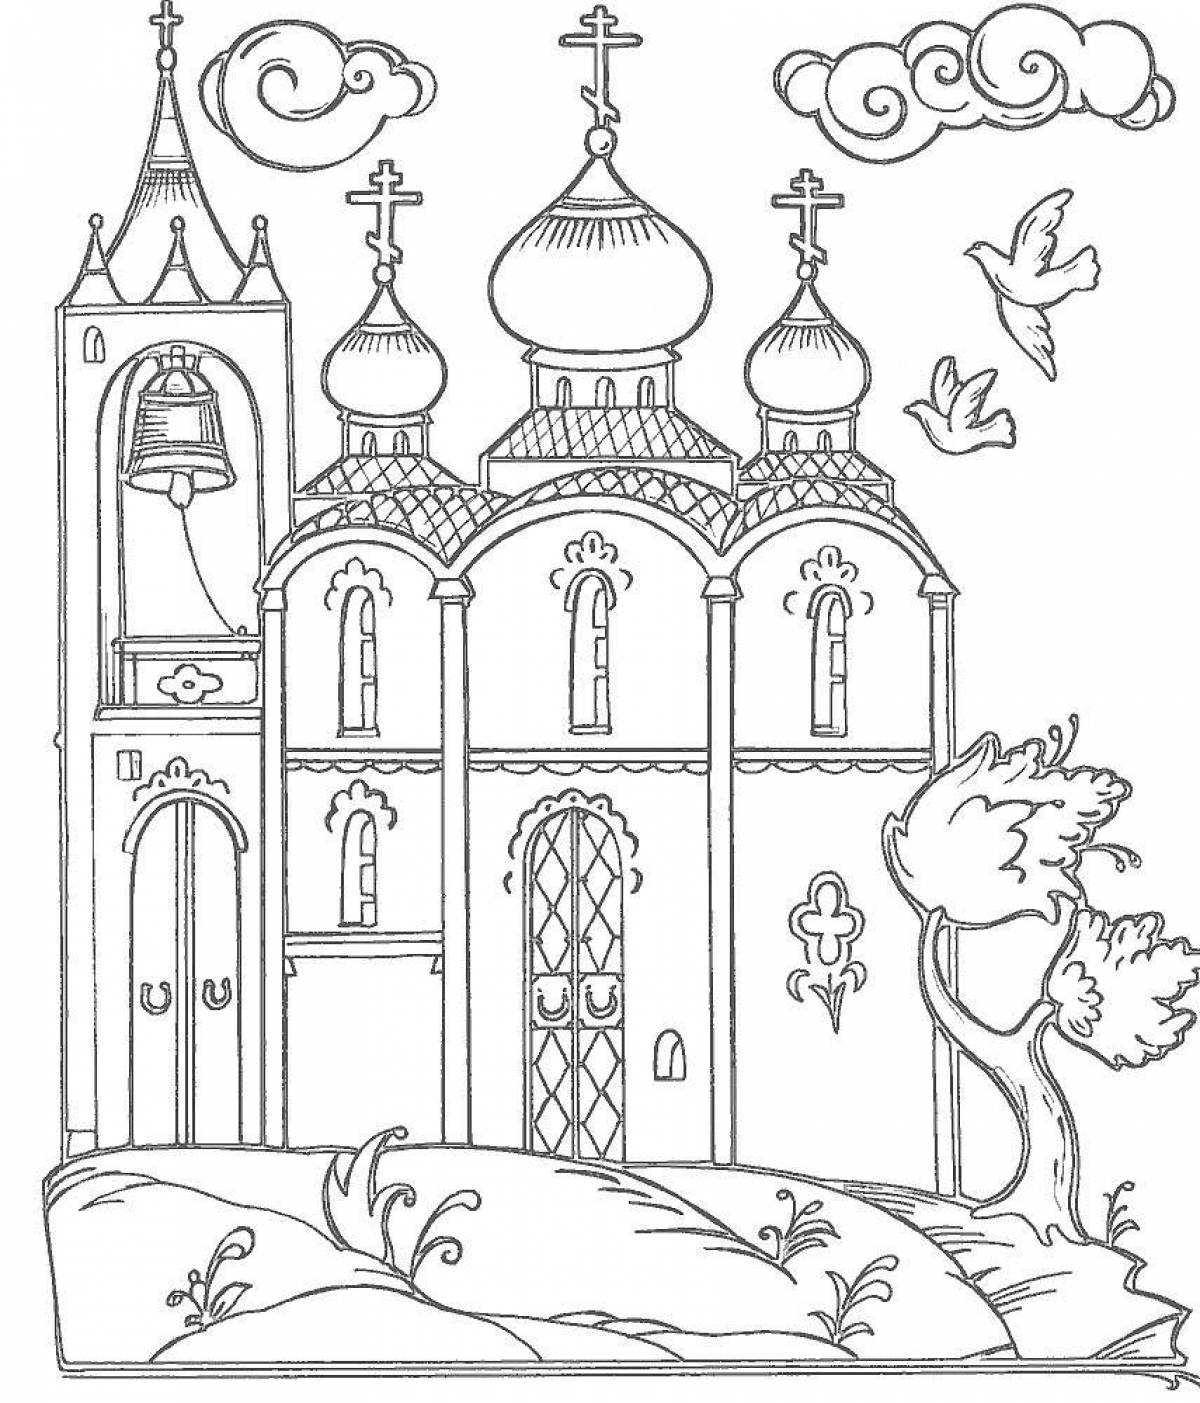 Exalted temple coloring page